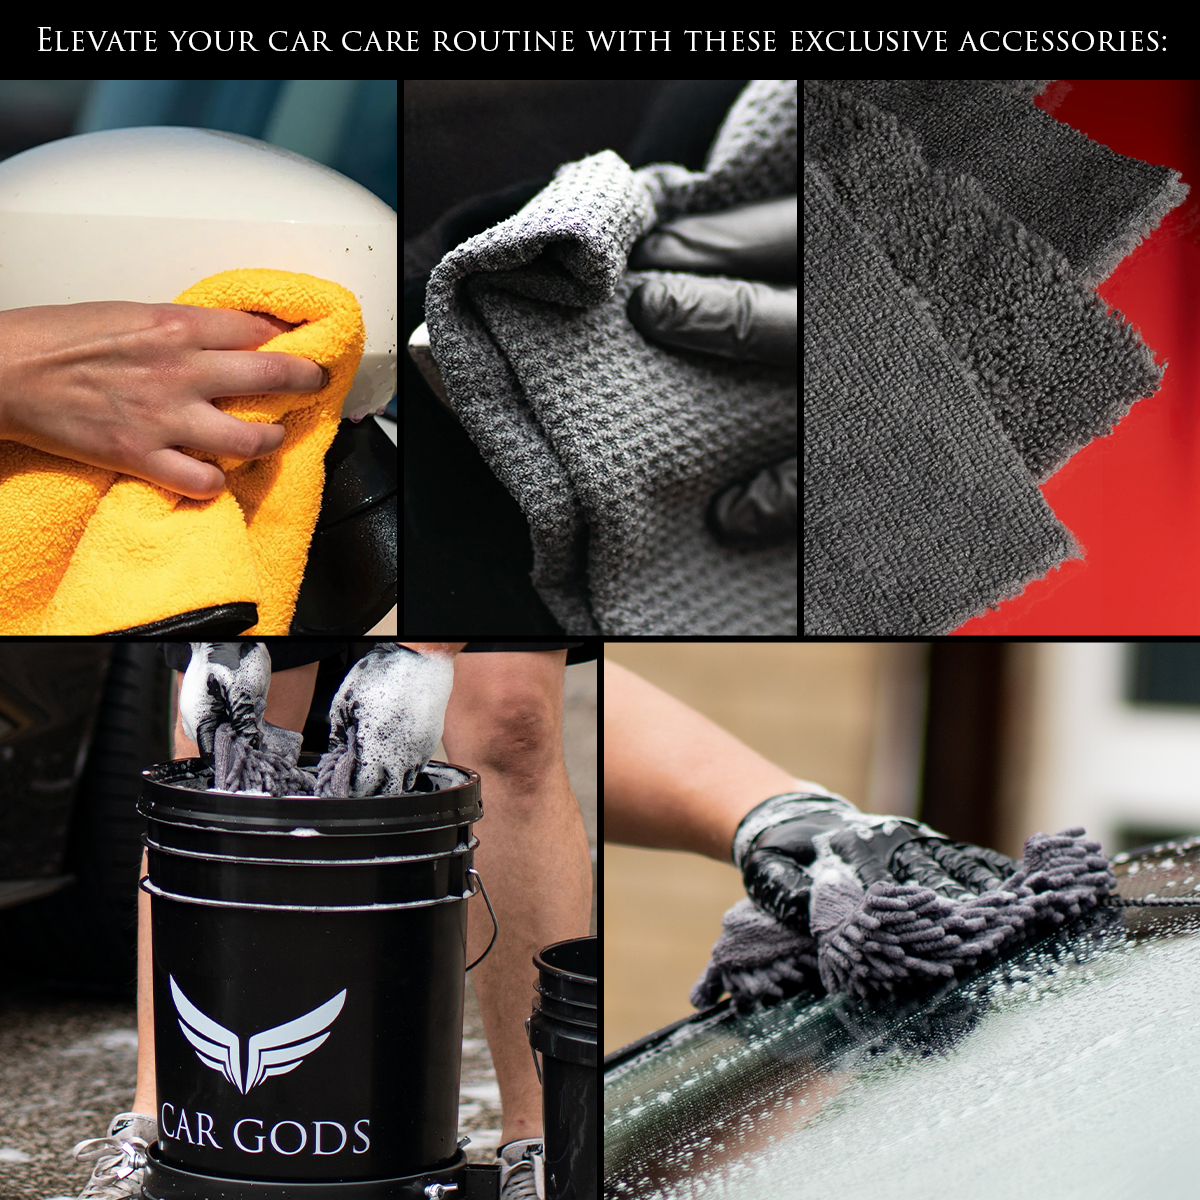 Elevate your car care with exclusive Car Gods accessories.